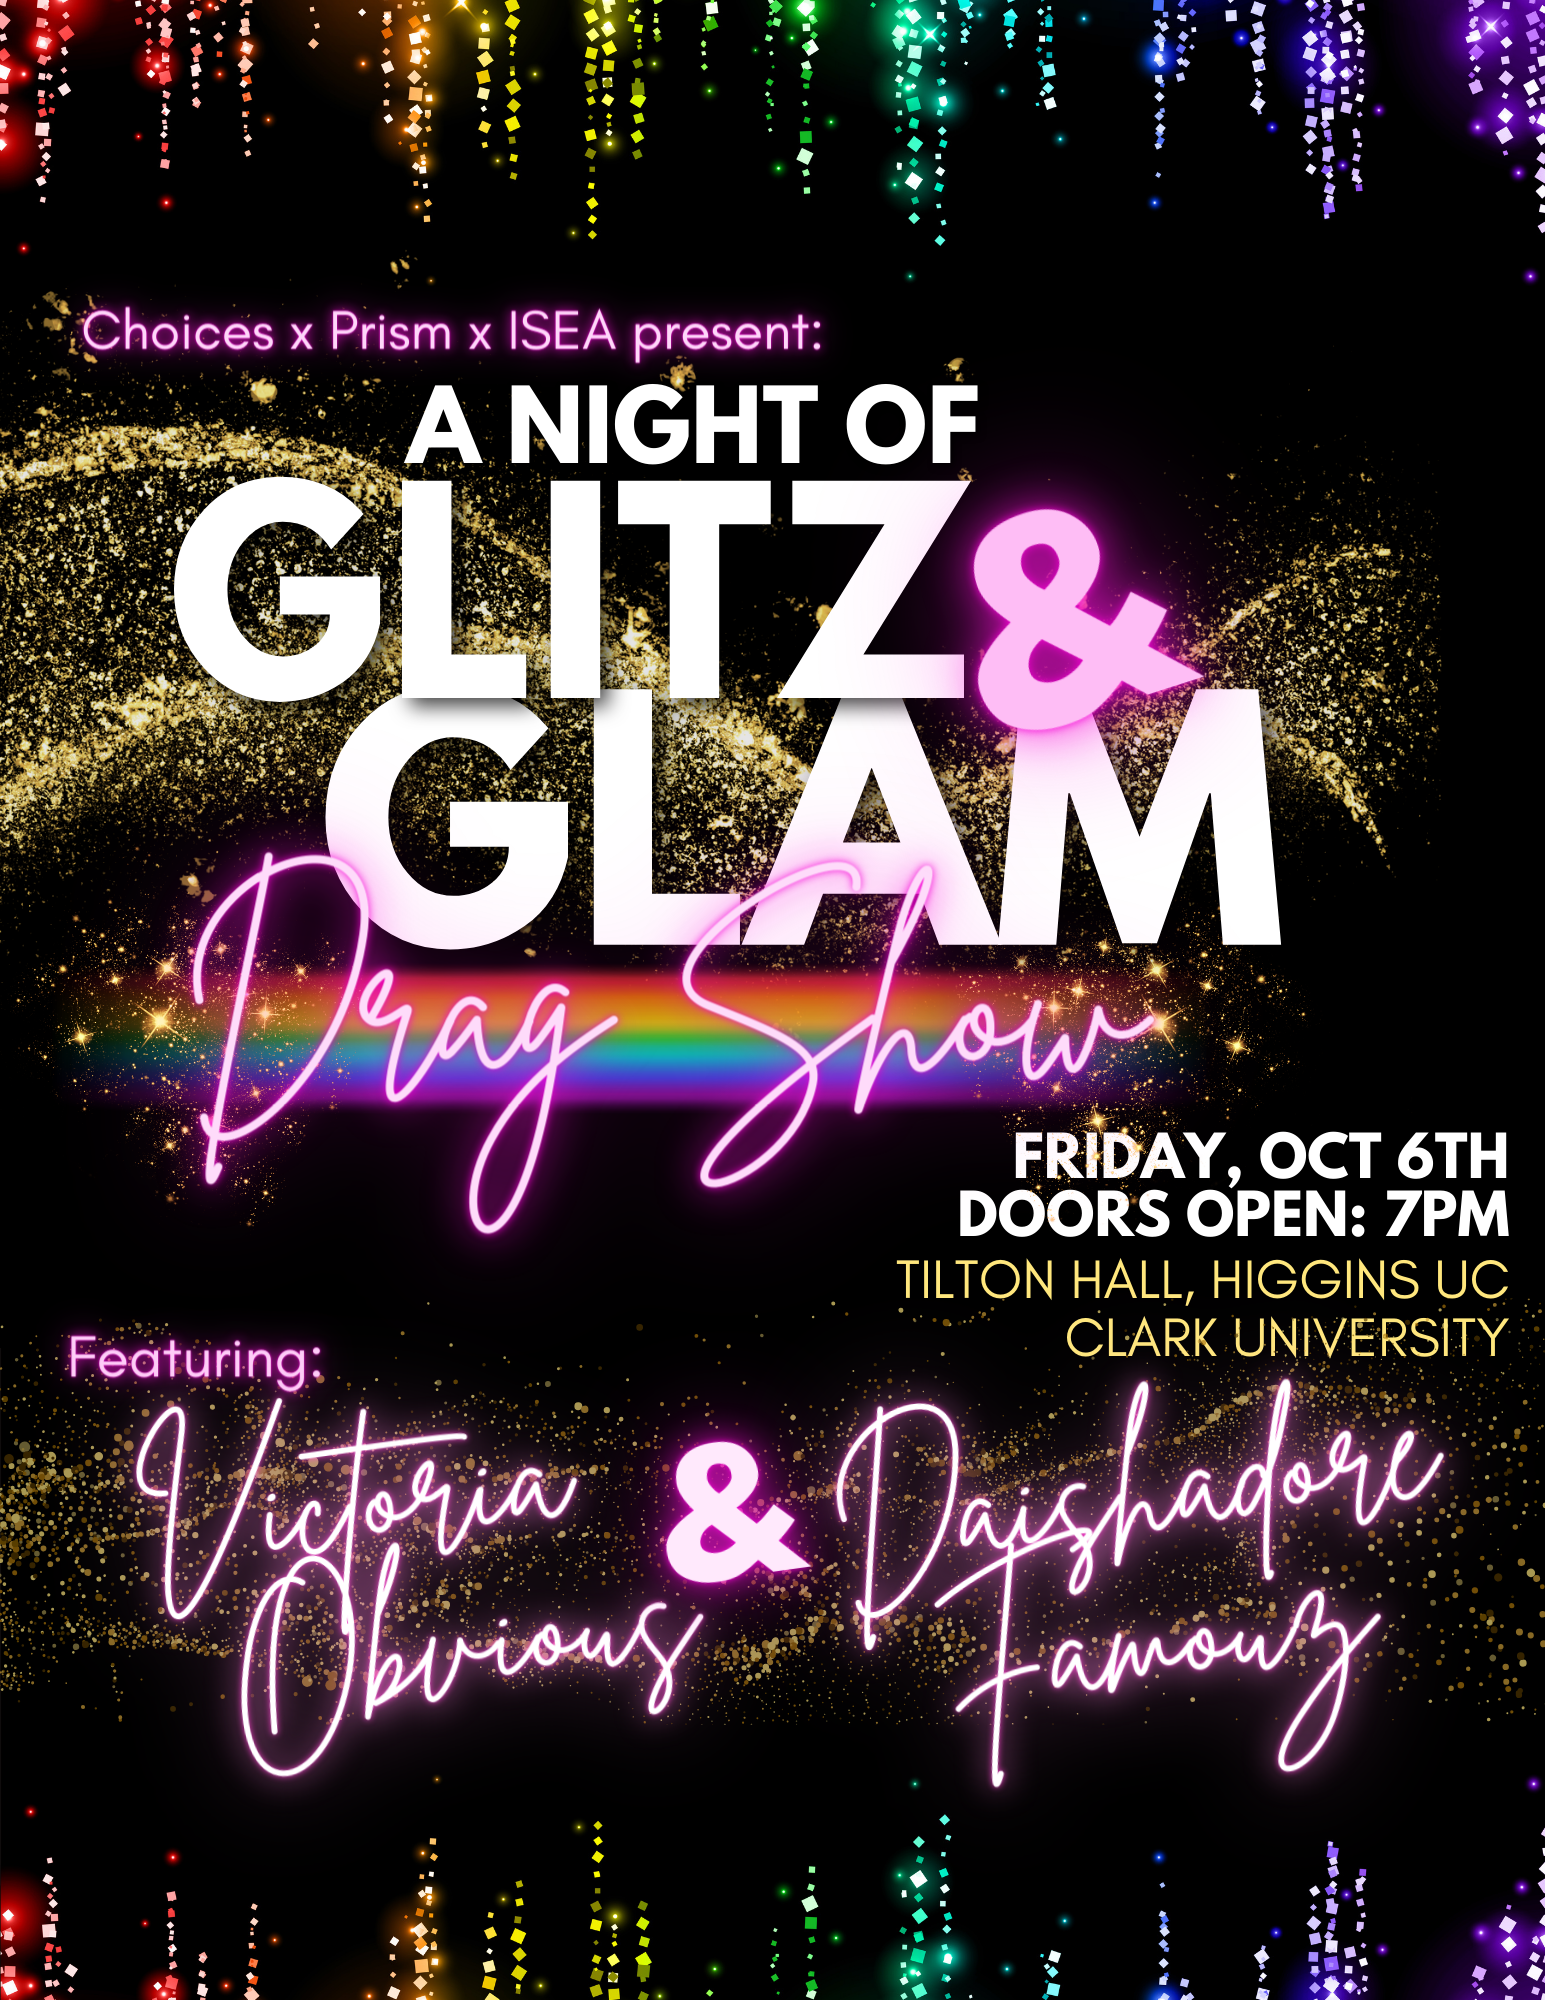 “A Night of Glitz & Glam” Drag Show (Oct. 6, Evening): Kick off LGBT+ History Month with the Office of Identity, Student Engagement, and Access (ISEA) along with CHOICES (Clark’s peer sexual health resource), featuring local Worcester Queens and mocktails on Friday, October 6th at 7pm in Tilton Hall (UC). This event is open to the public, so you are encouraged to bring guests, friends, or family.